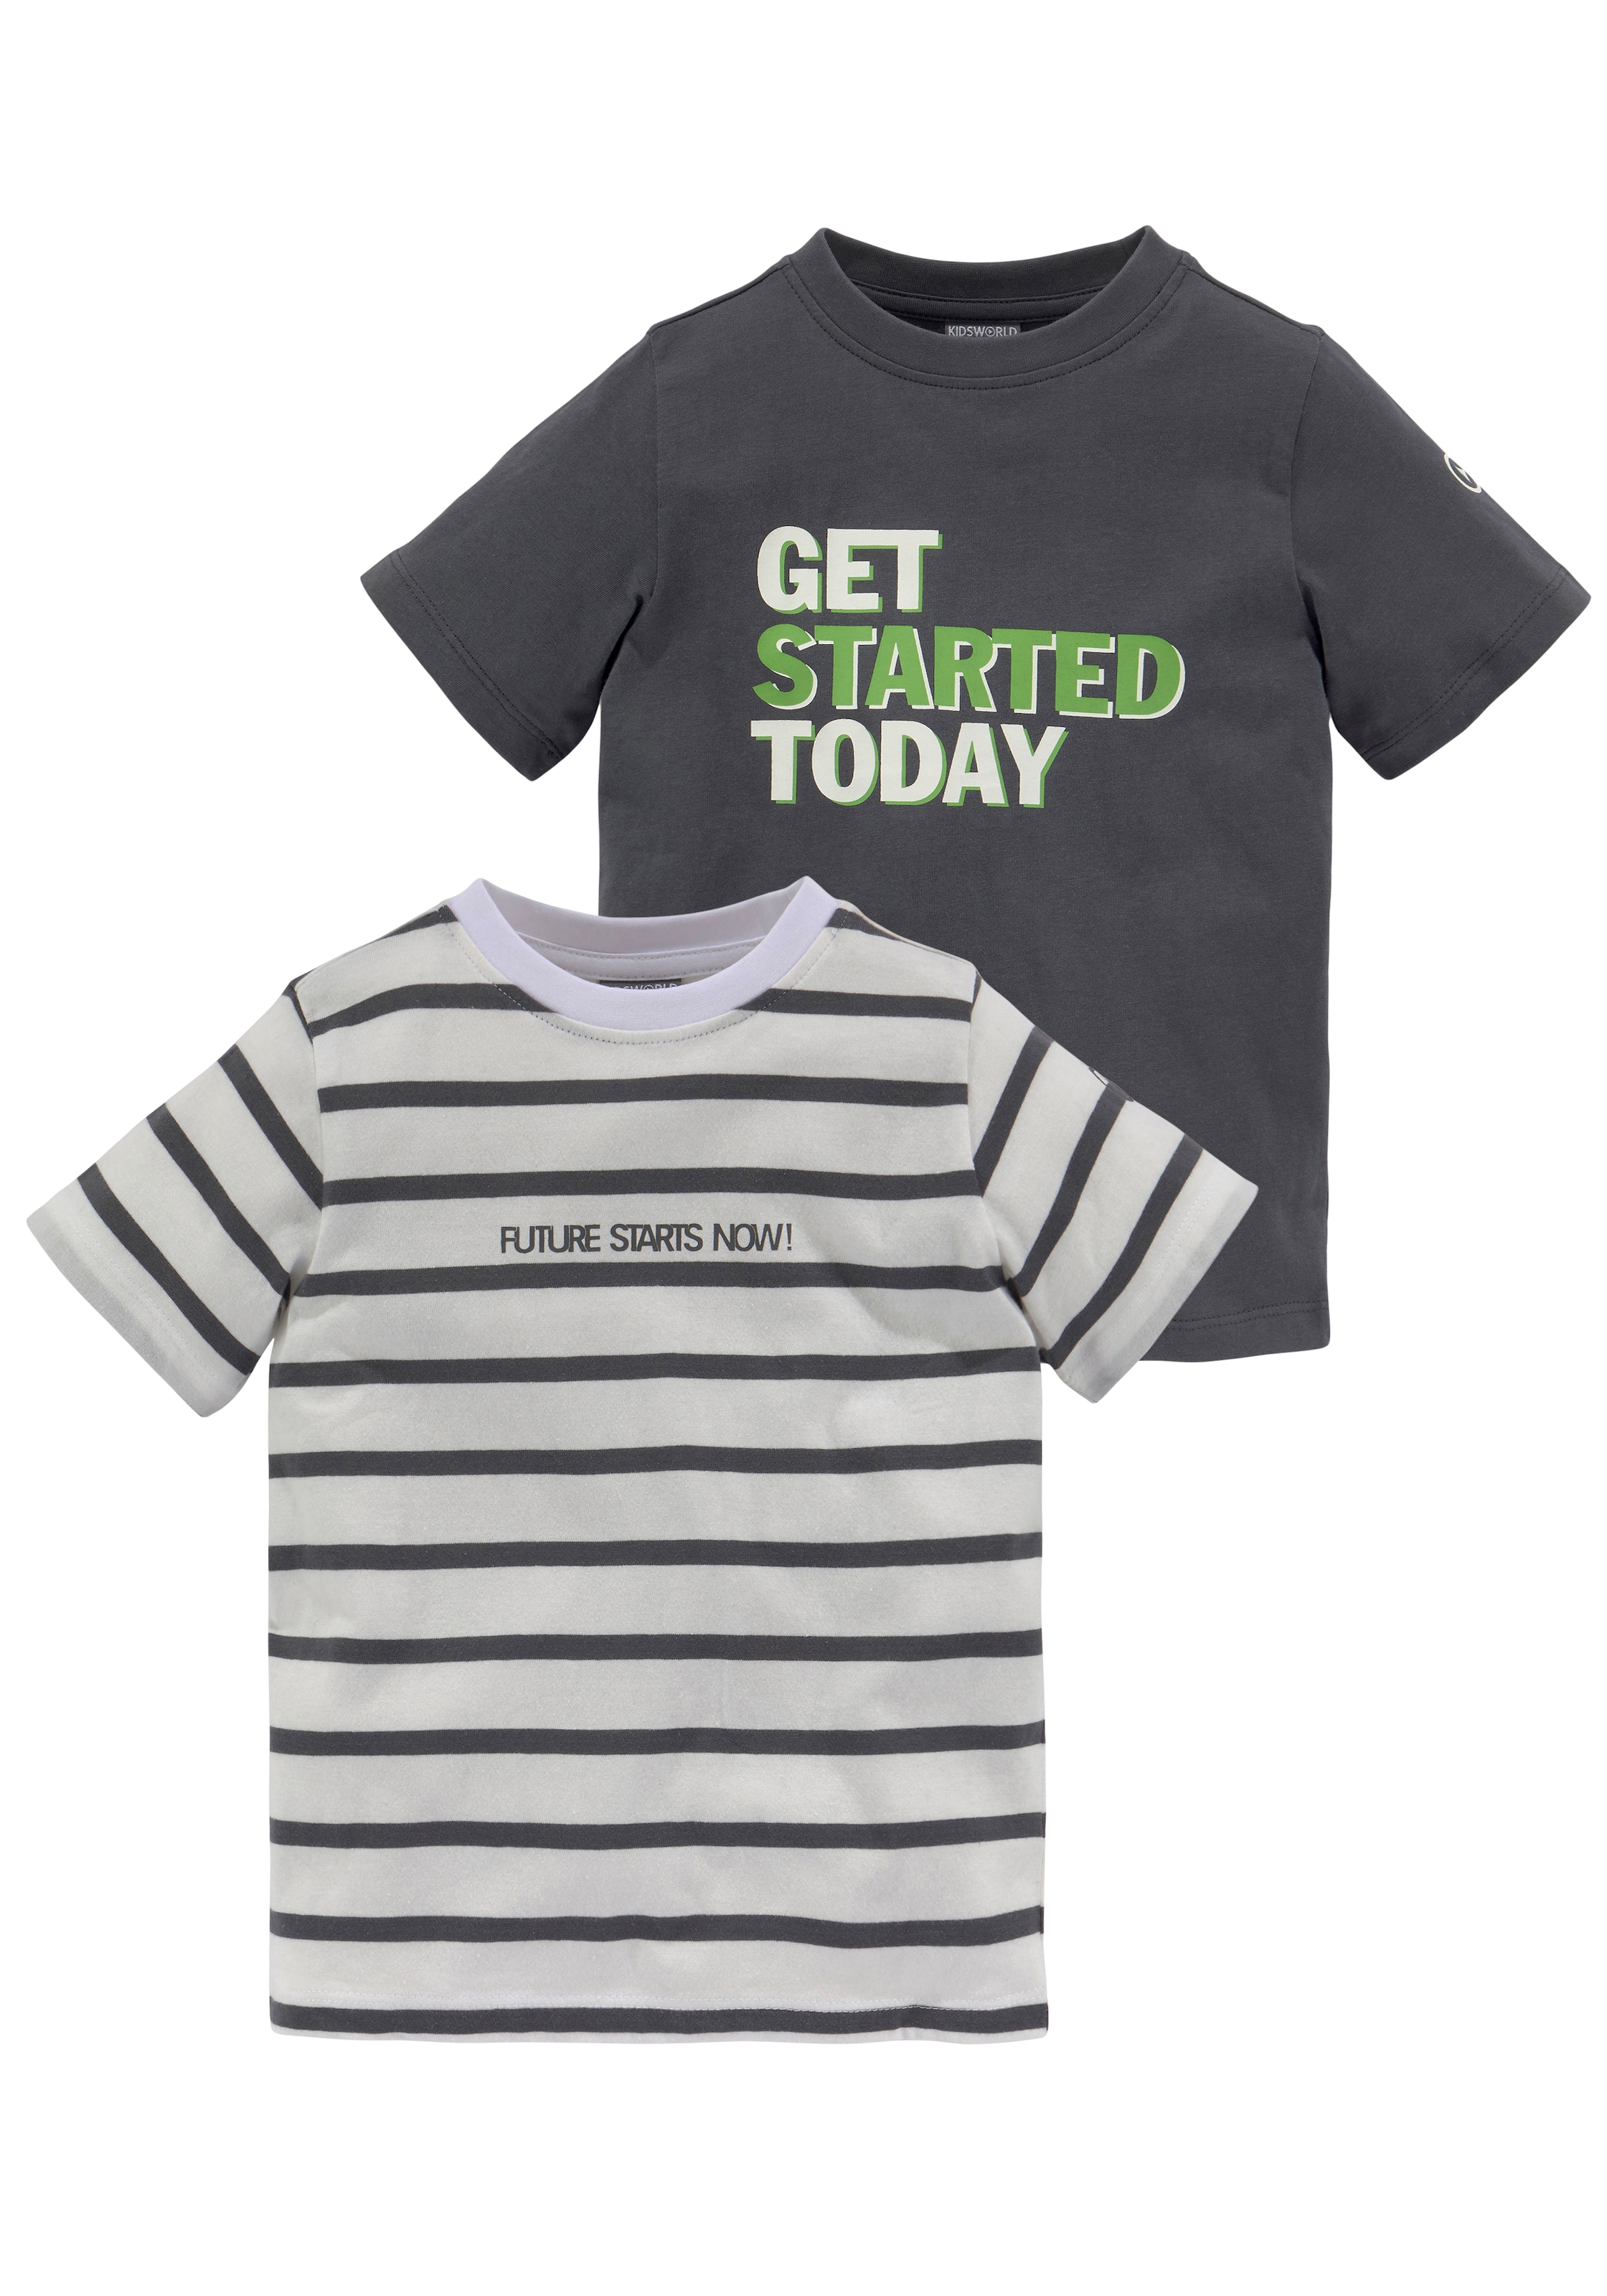 KIDSWORLD T-Shirt »TOMORROW IS tlg.), TOO LATE«, bei 2 Sprücheshirts (Packung